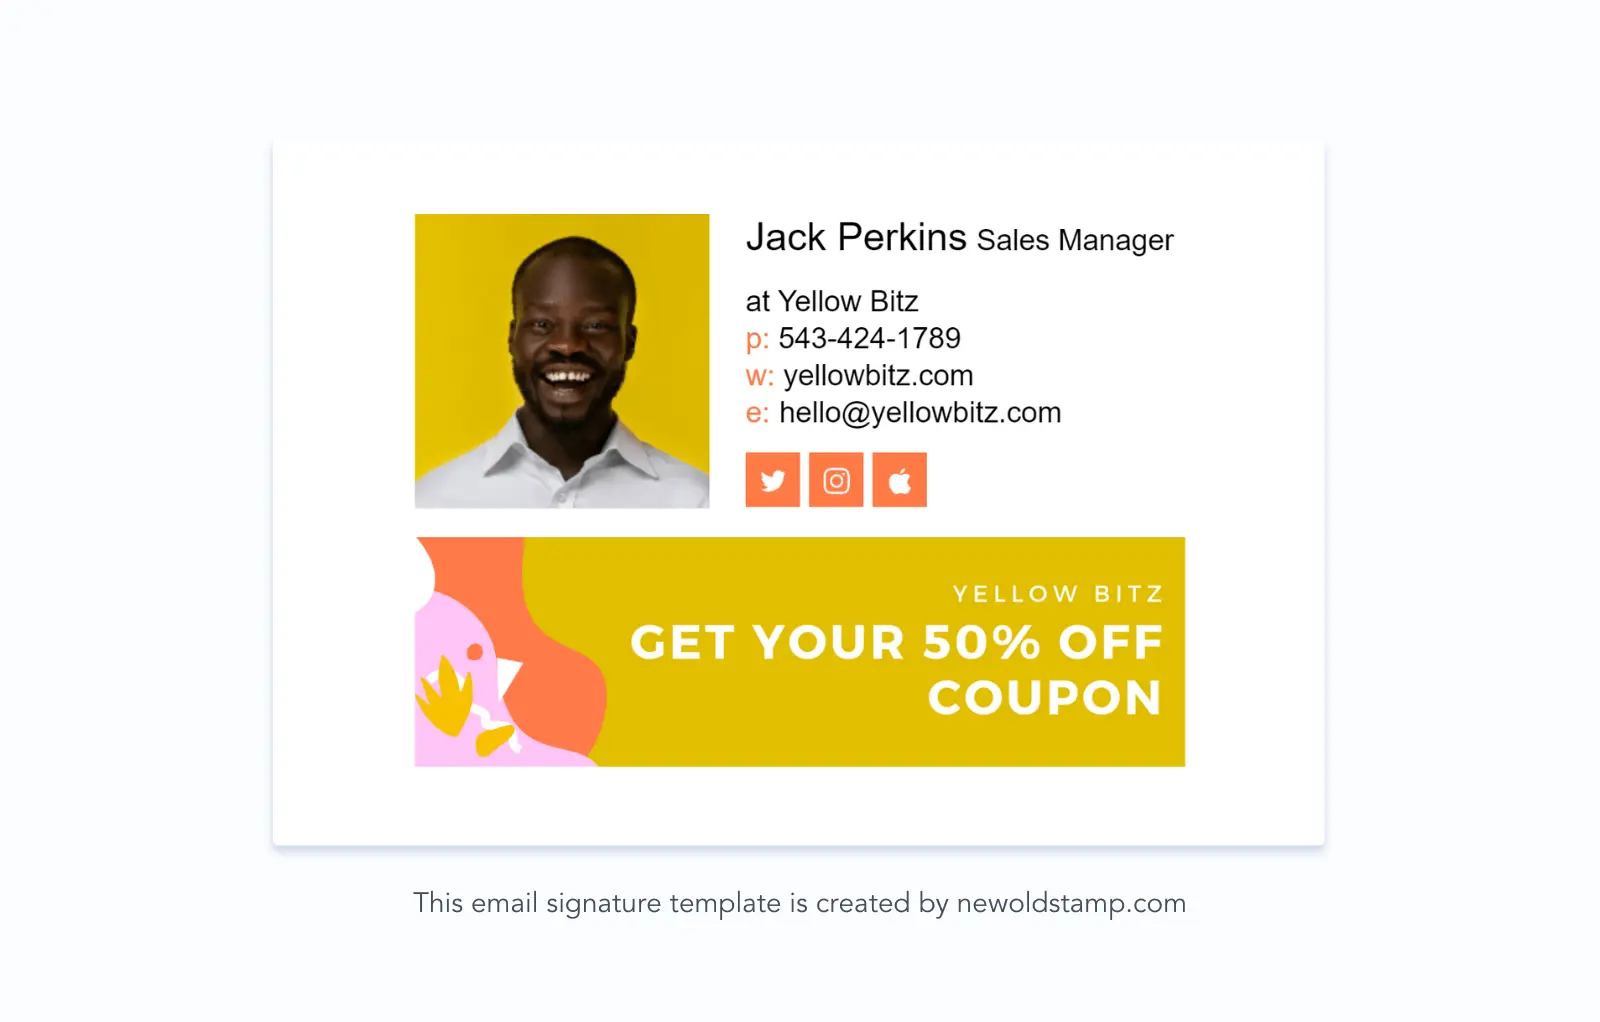 Email signature with a CTA banner